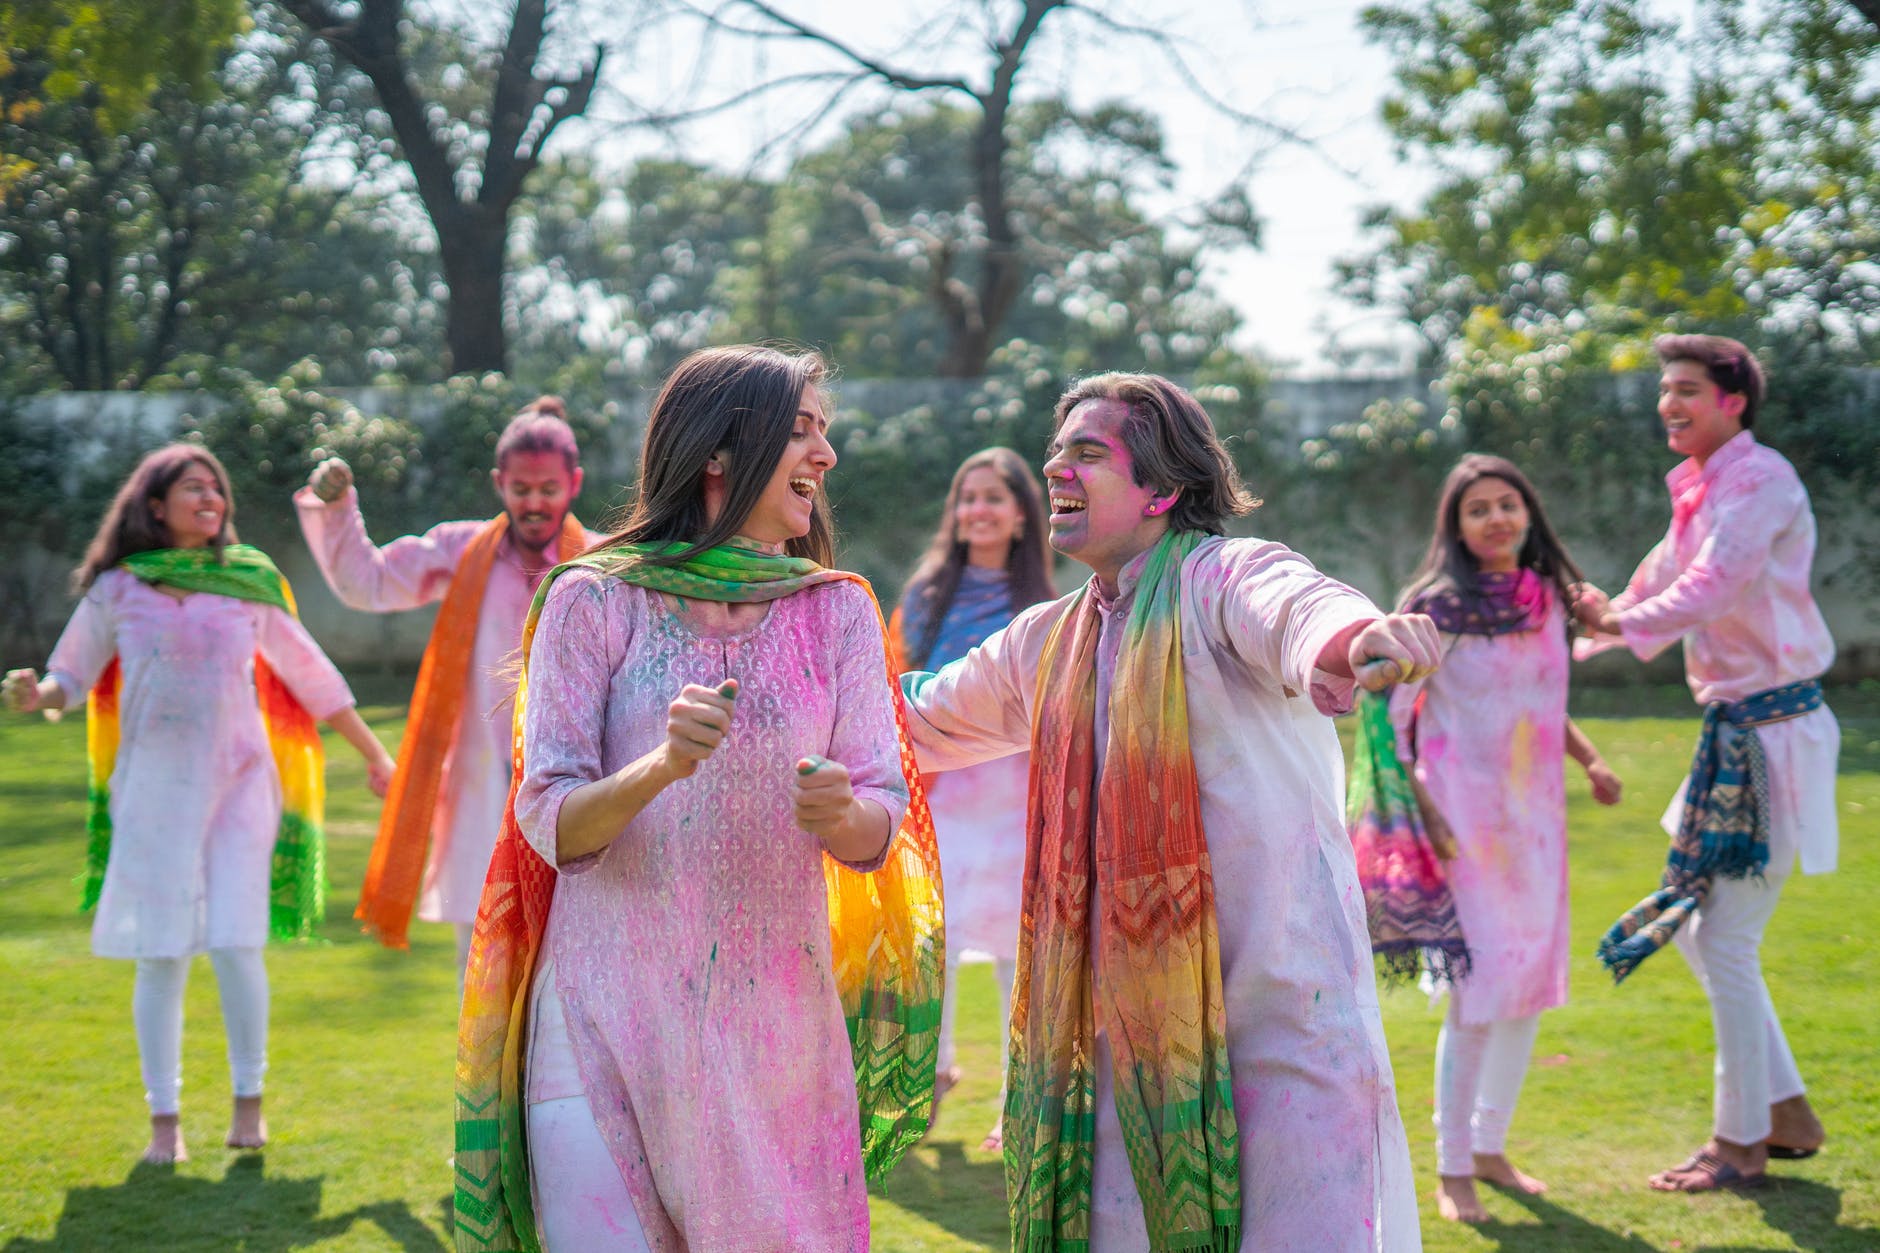 essay of holi in 150 words